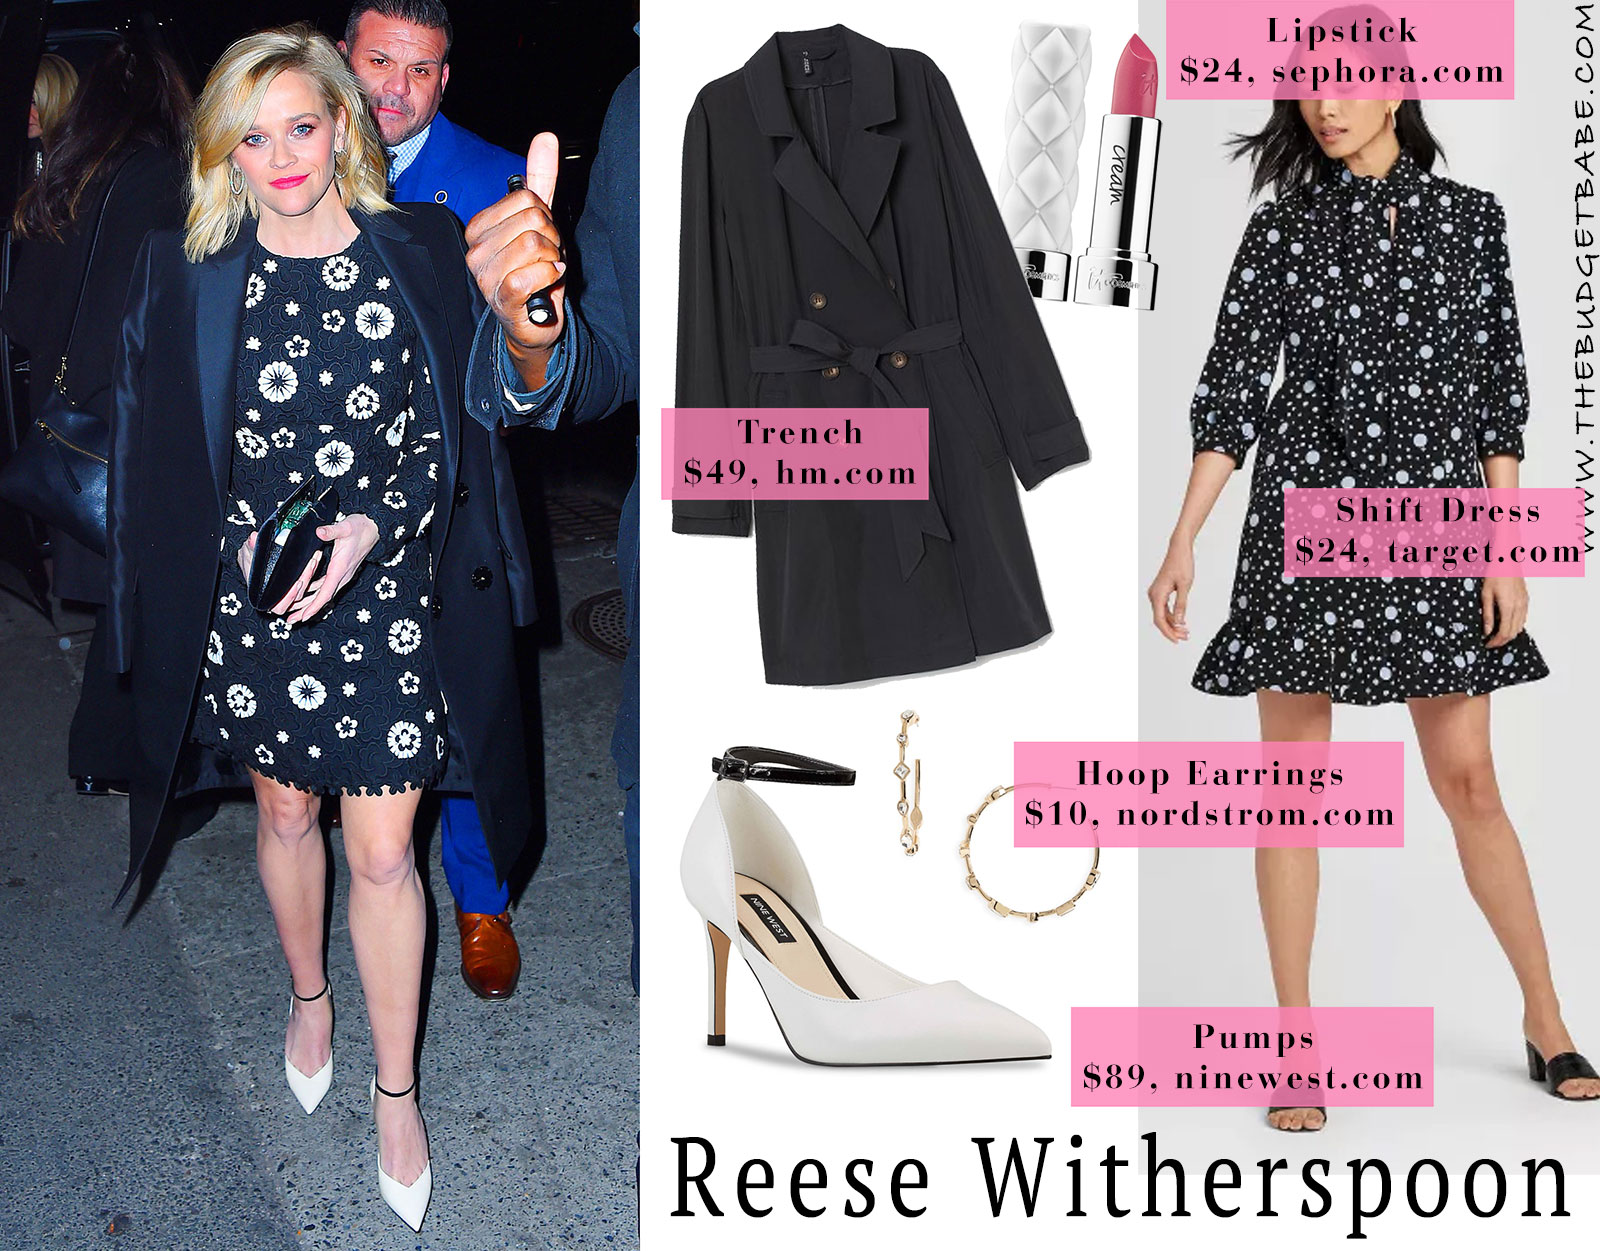 Reese Witherspoon's Navy and White Lace Dress Look for Less